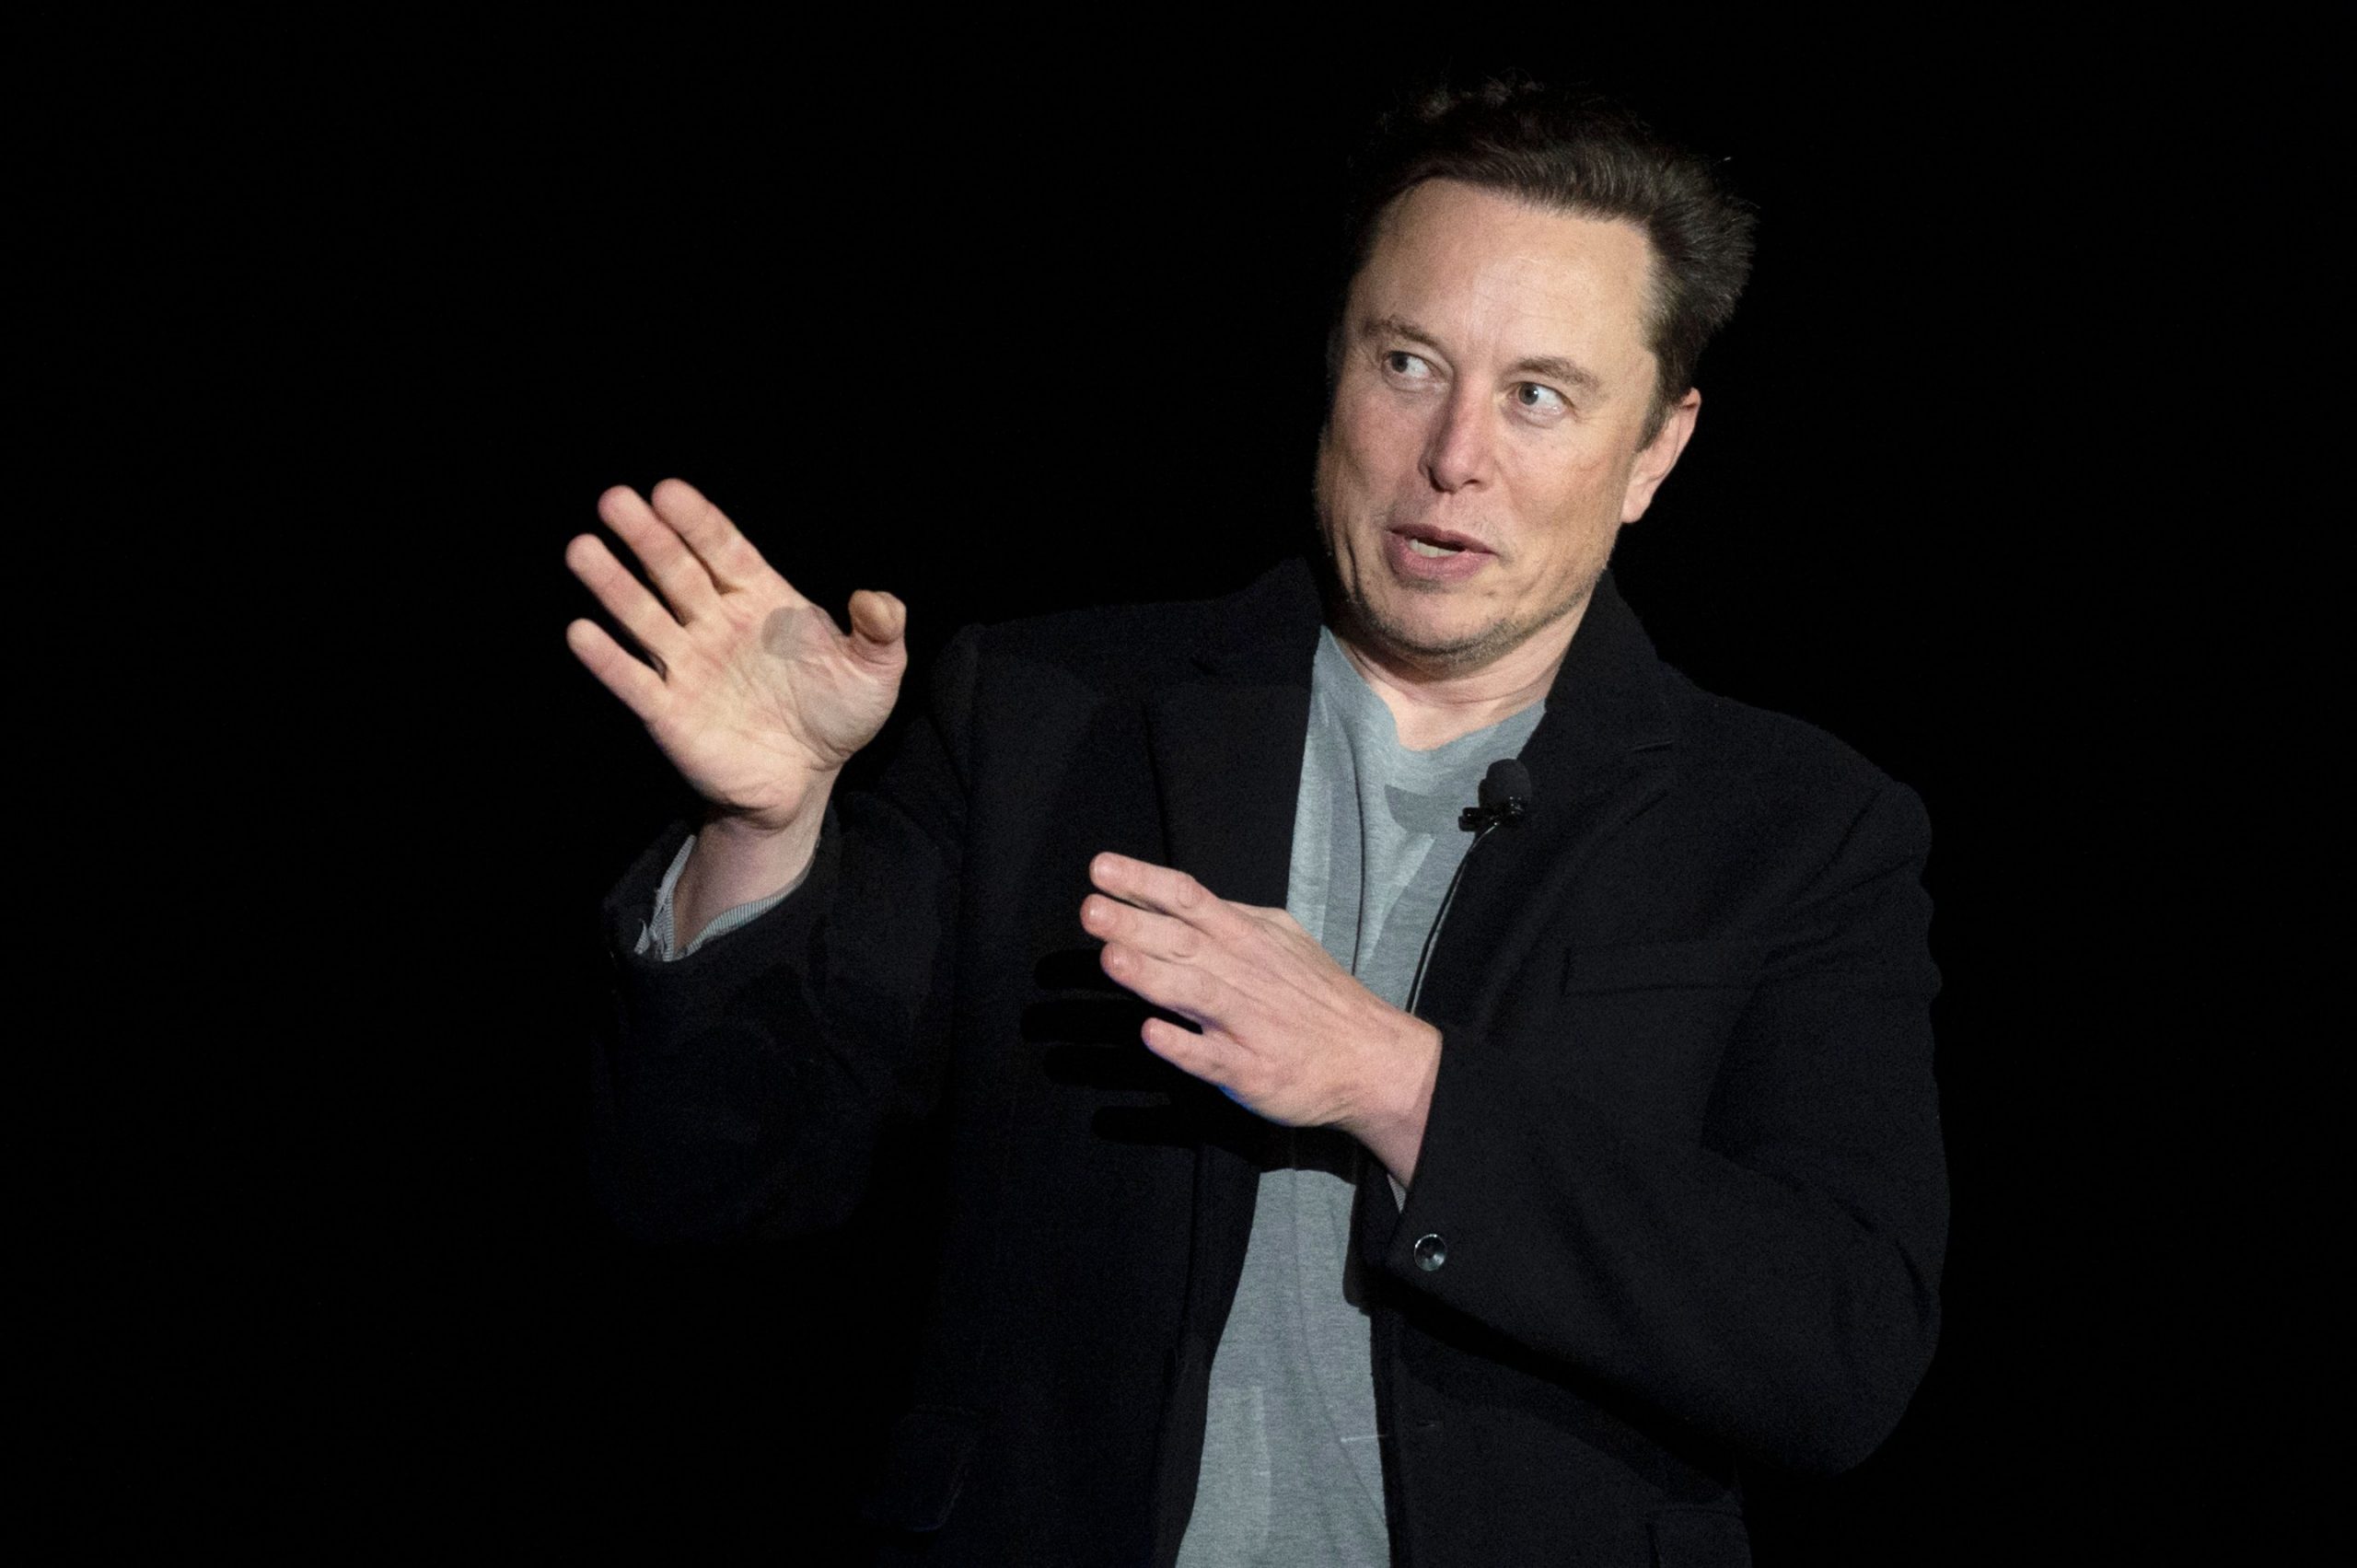 Twitter rebuffed Elon Musk. Now he says he has raised money for a tender offer